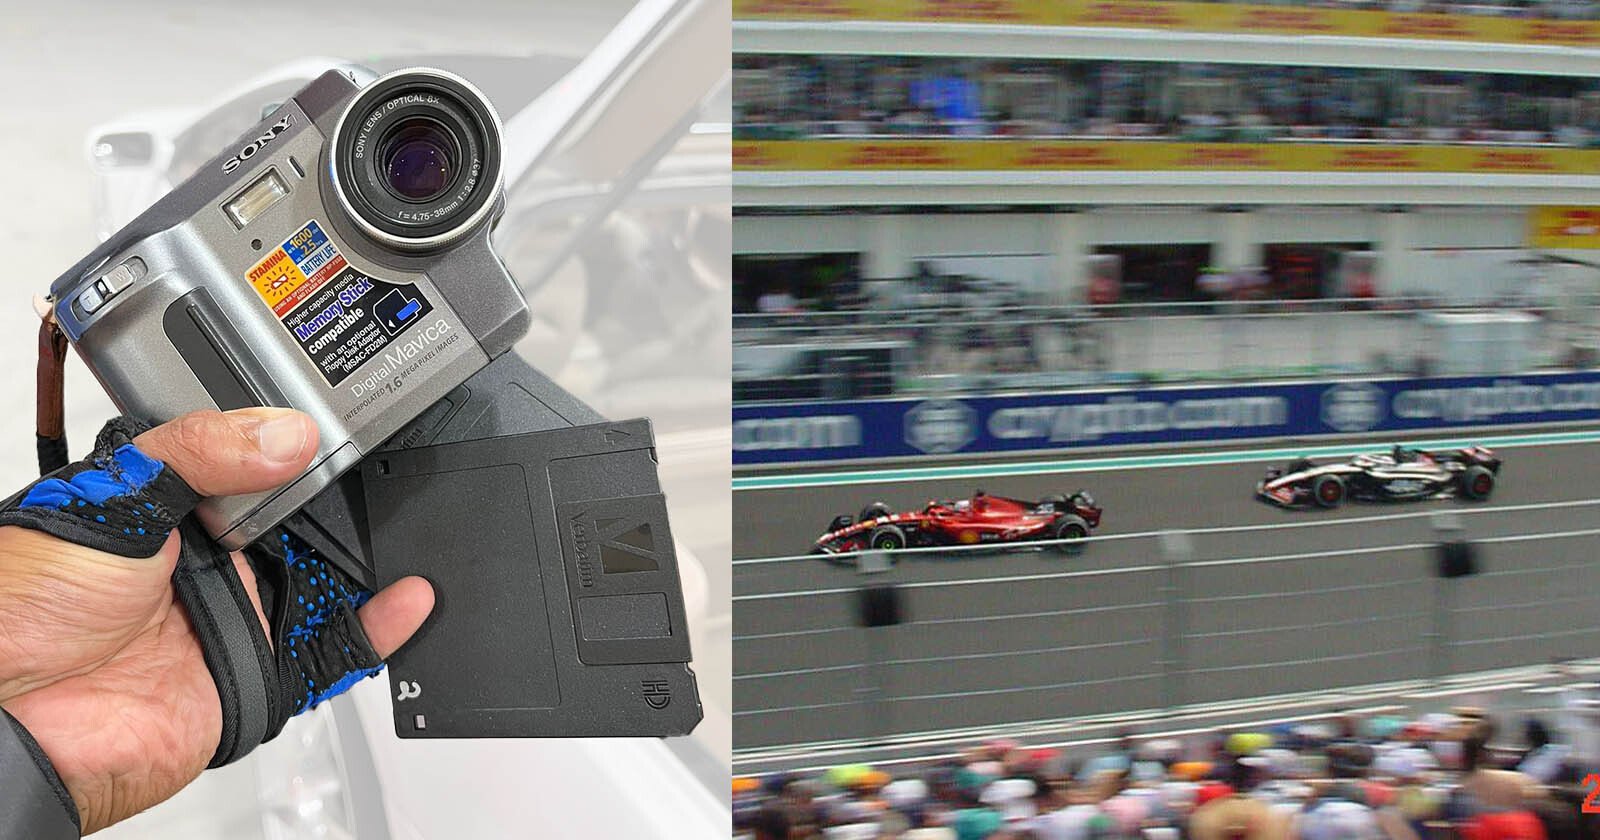 F1 Bans Fans Pro Camera, So He Brings a Floppy Disk Camera Instead